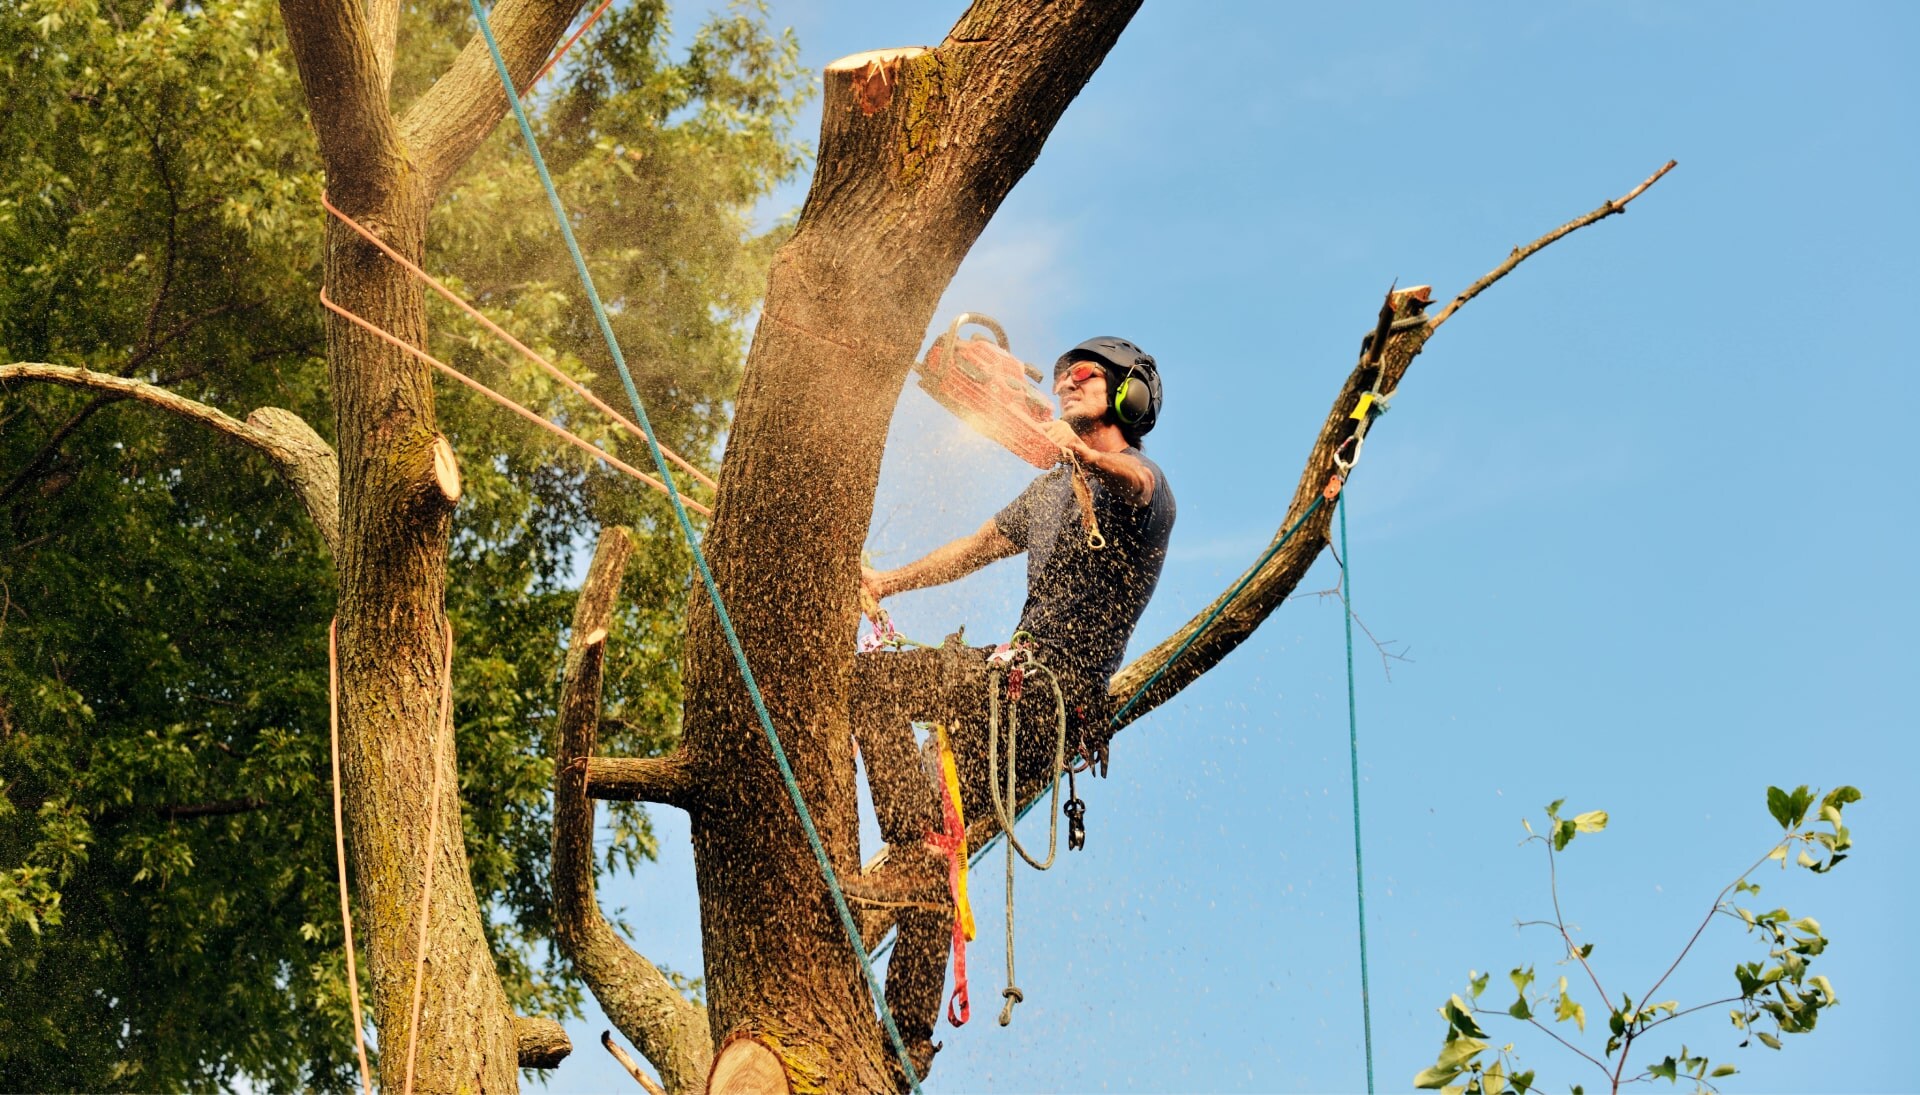 Lancaster tree removal experts solve tree issues.